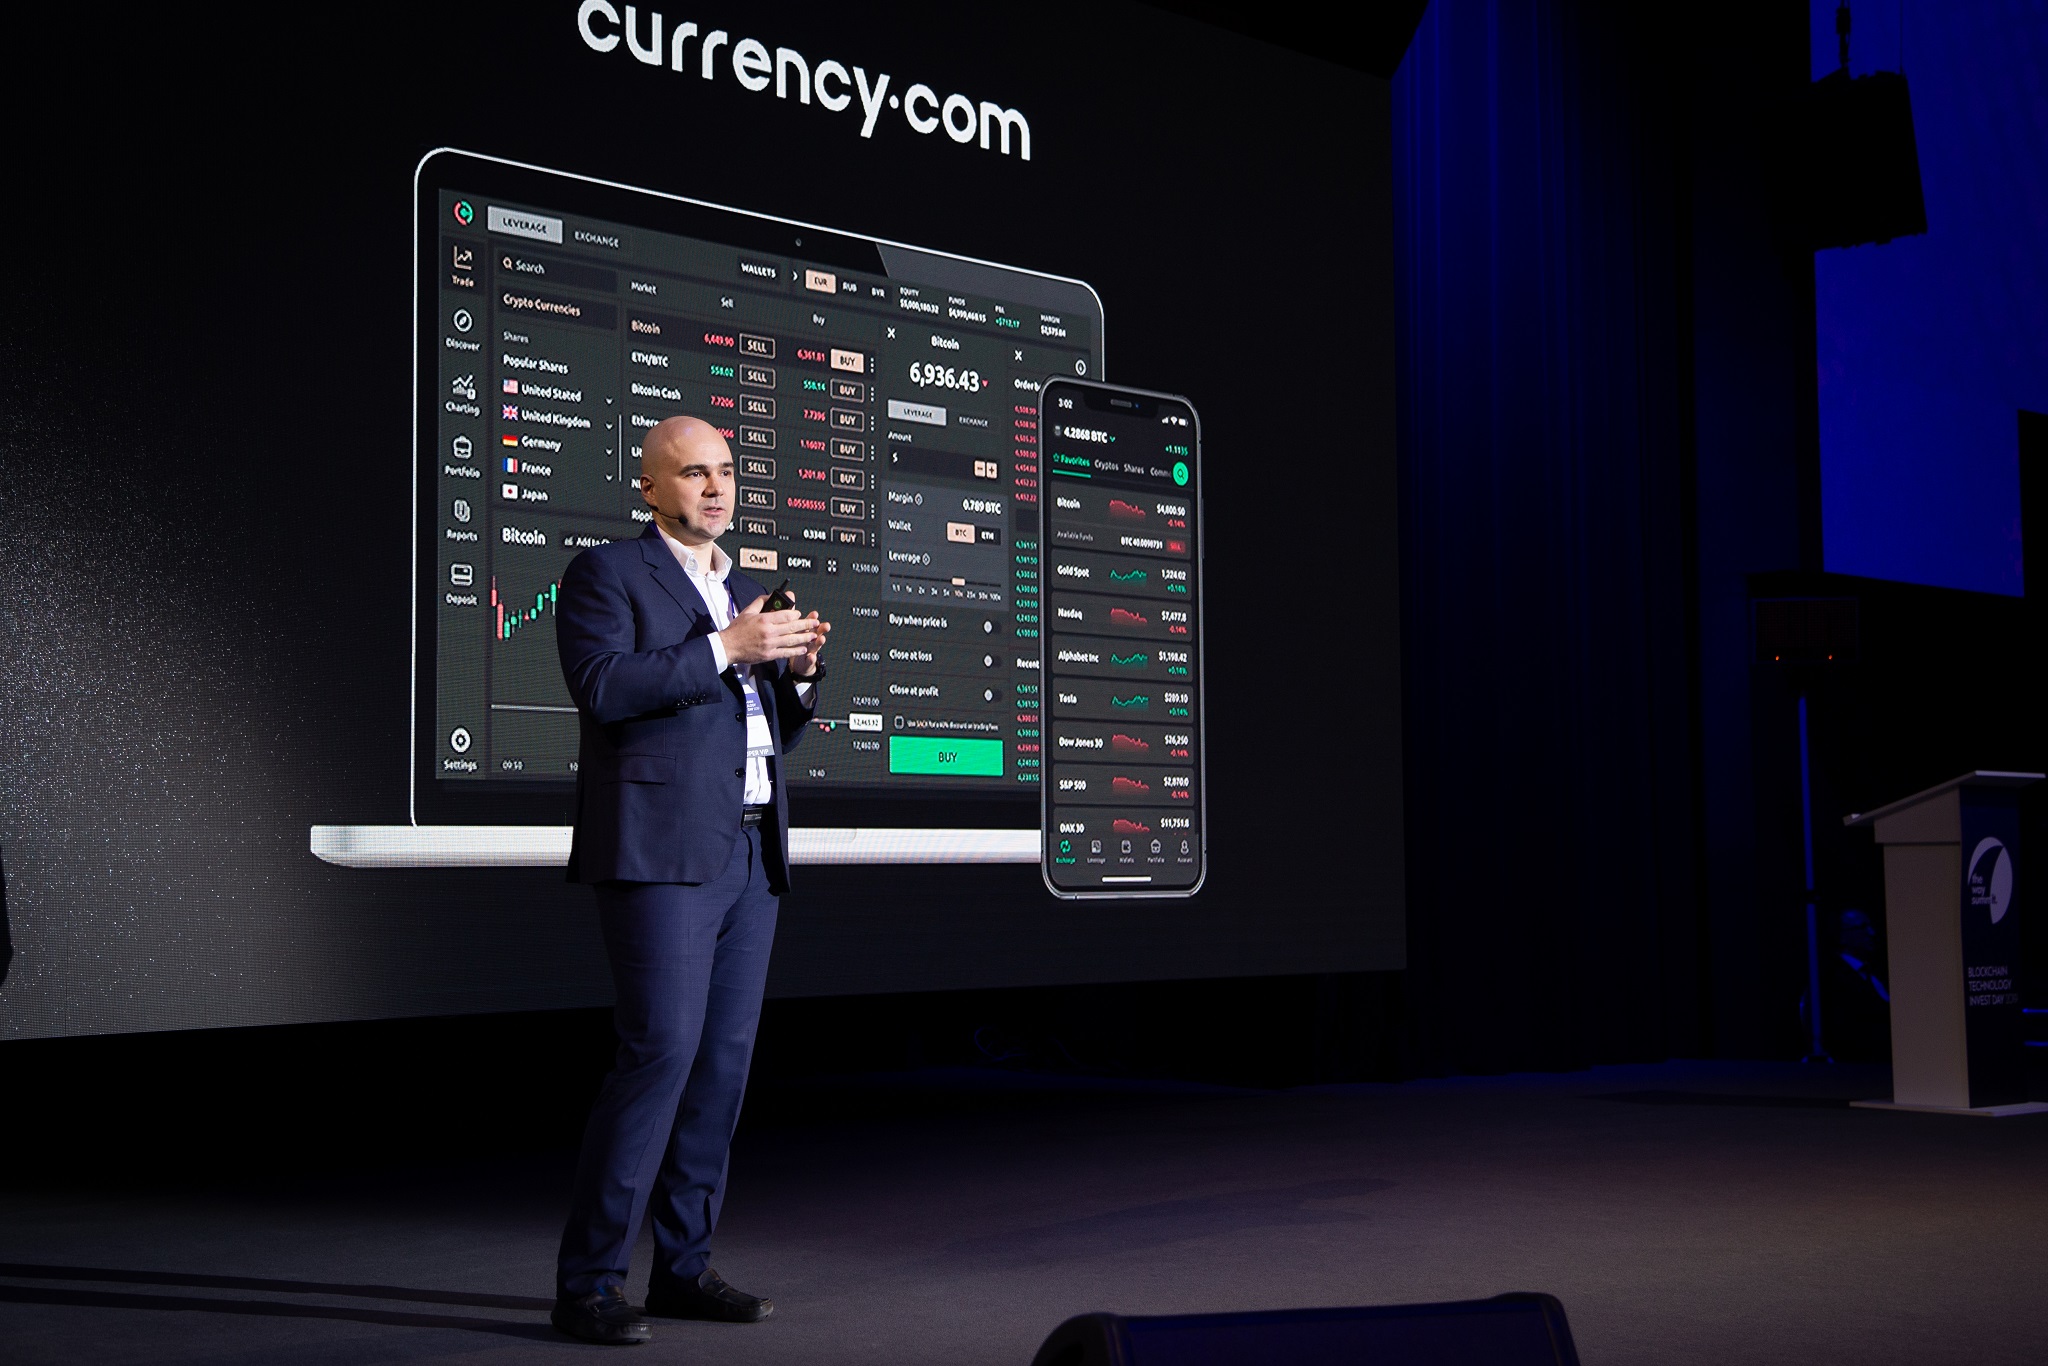  : Currency.com      10 . 